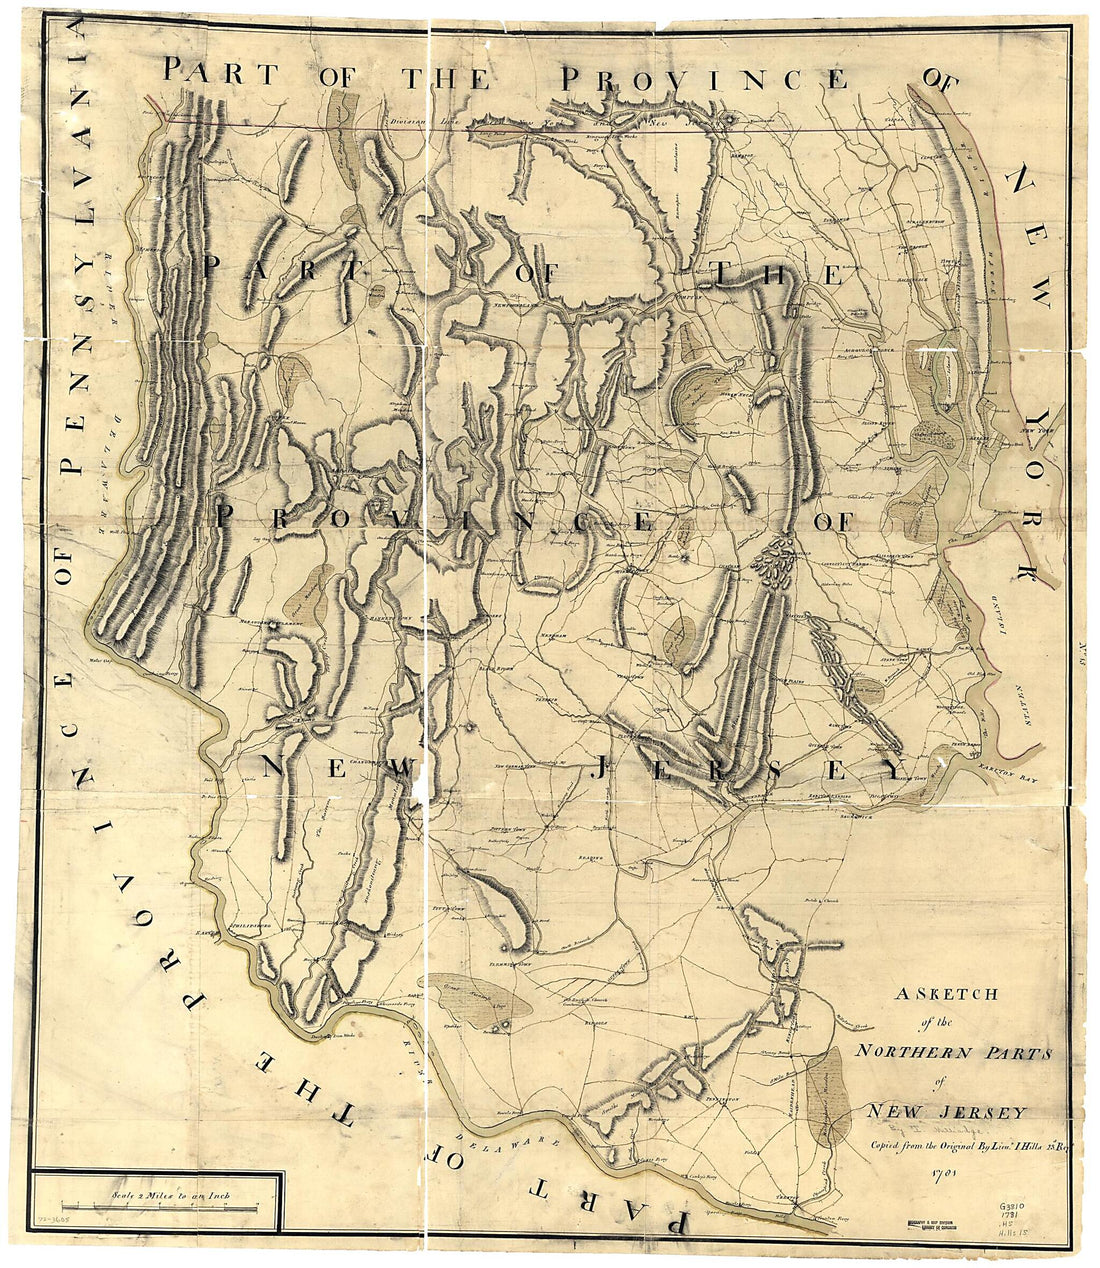 This old map of A Sketch of the Northern Parts of New Jersey from 1781 was created by John Hills, Thomas Millidge, Benjamin Morgan in 1781